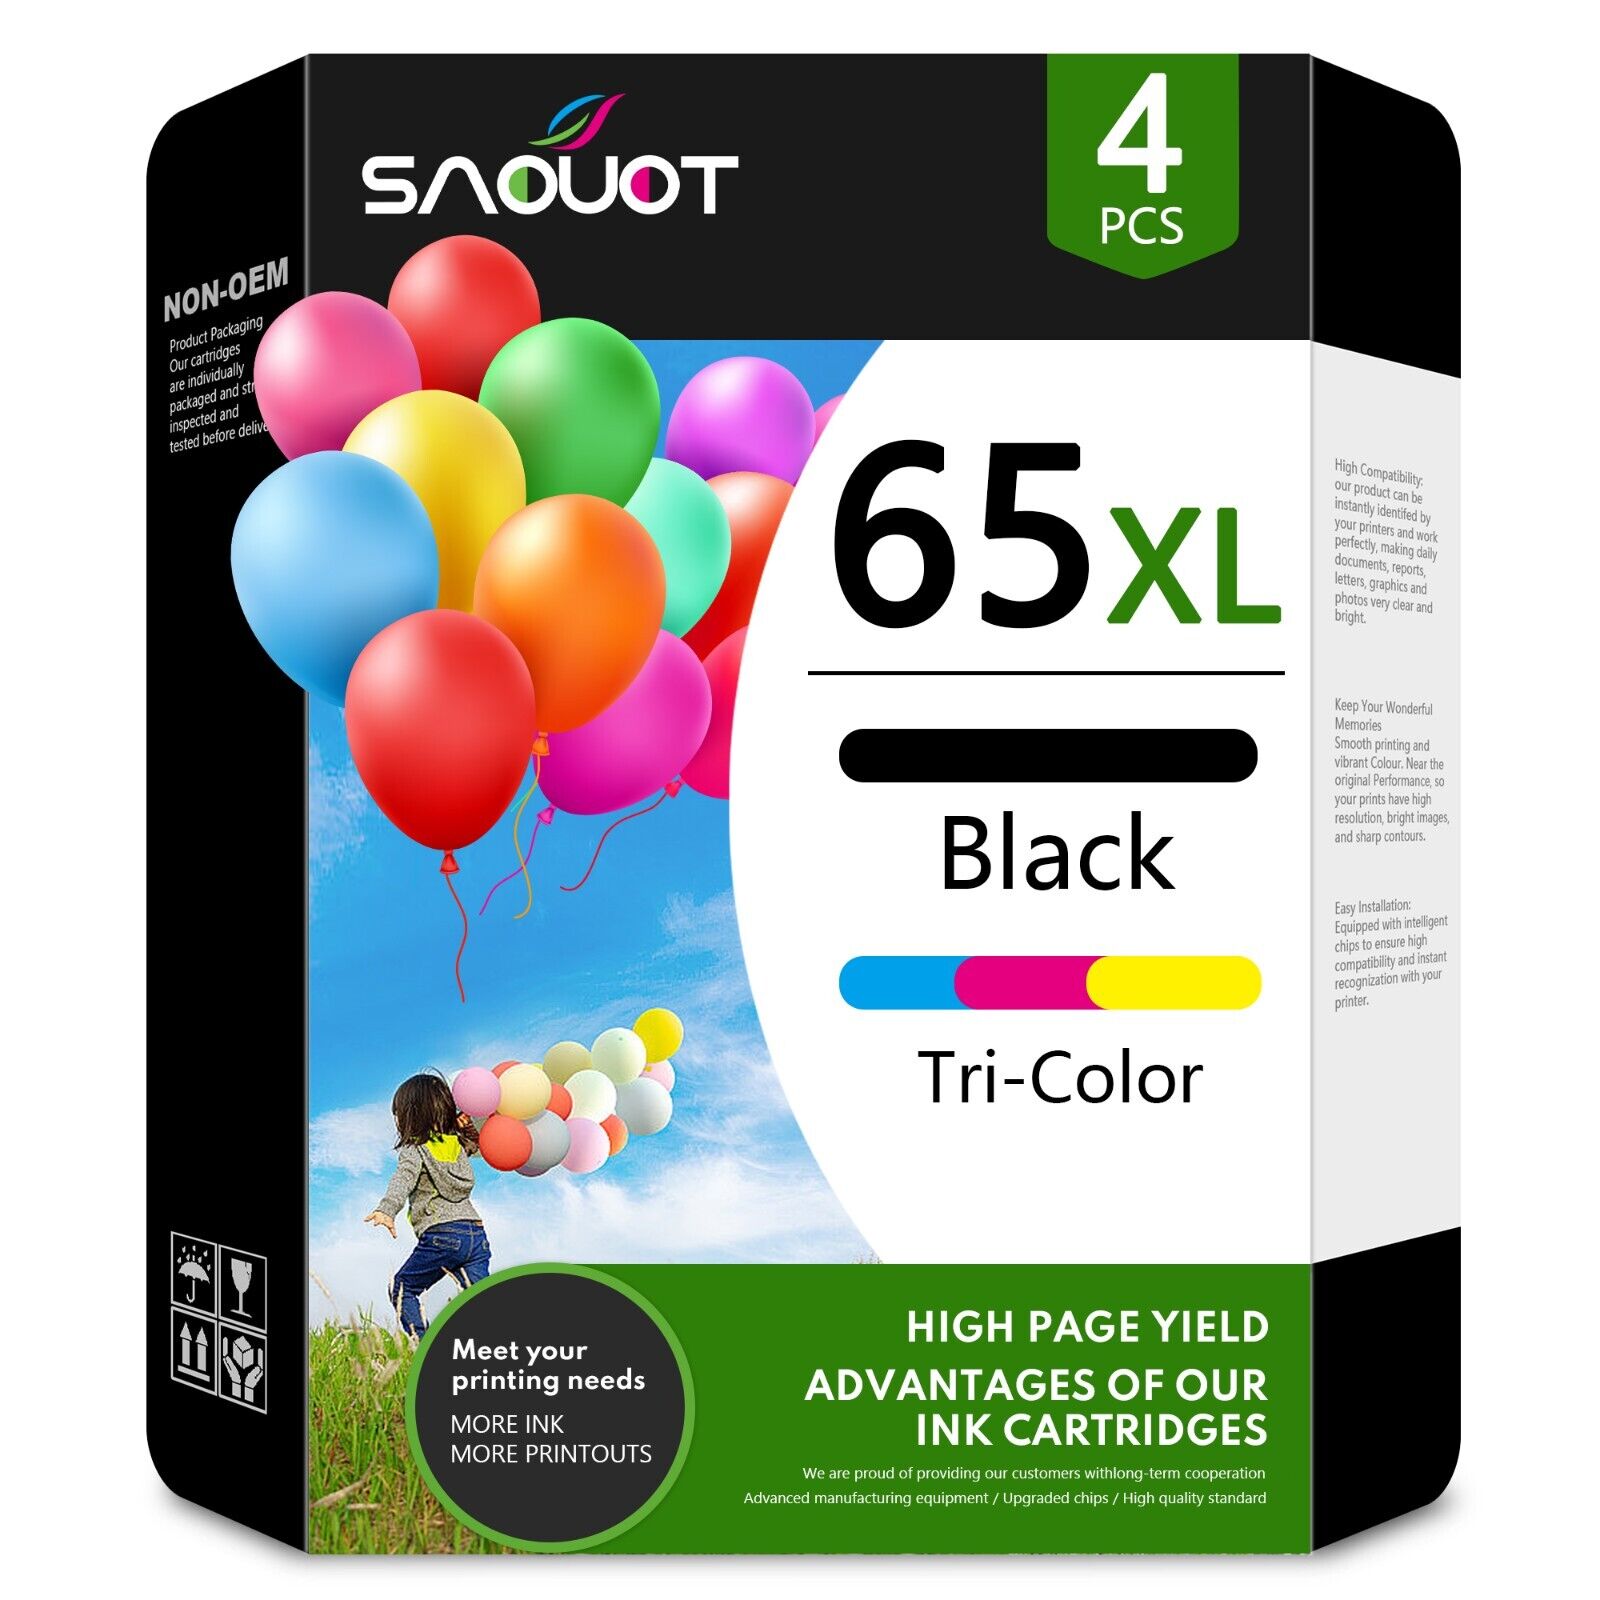 65XL Replacement for HP 65 XL Ink Cartridge Black Color OfficeJet 3830 3831